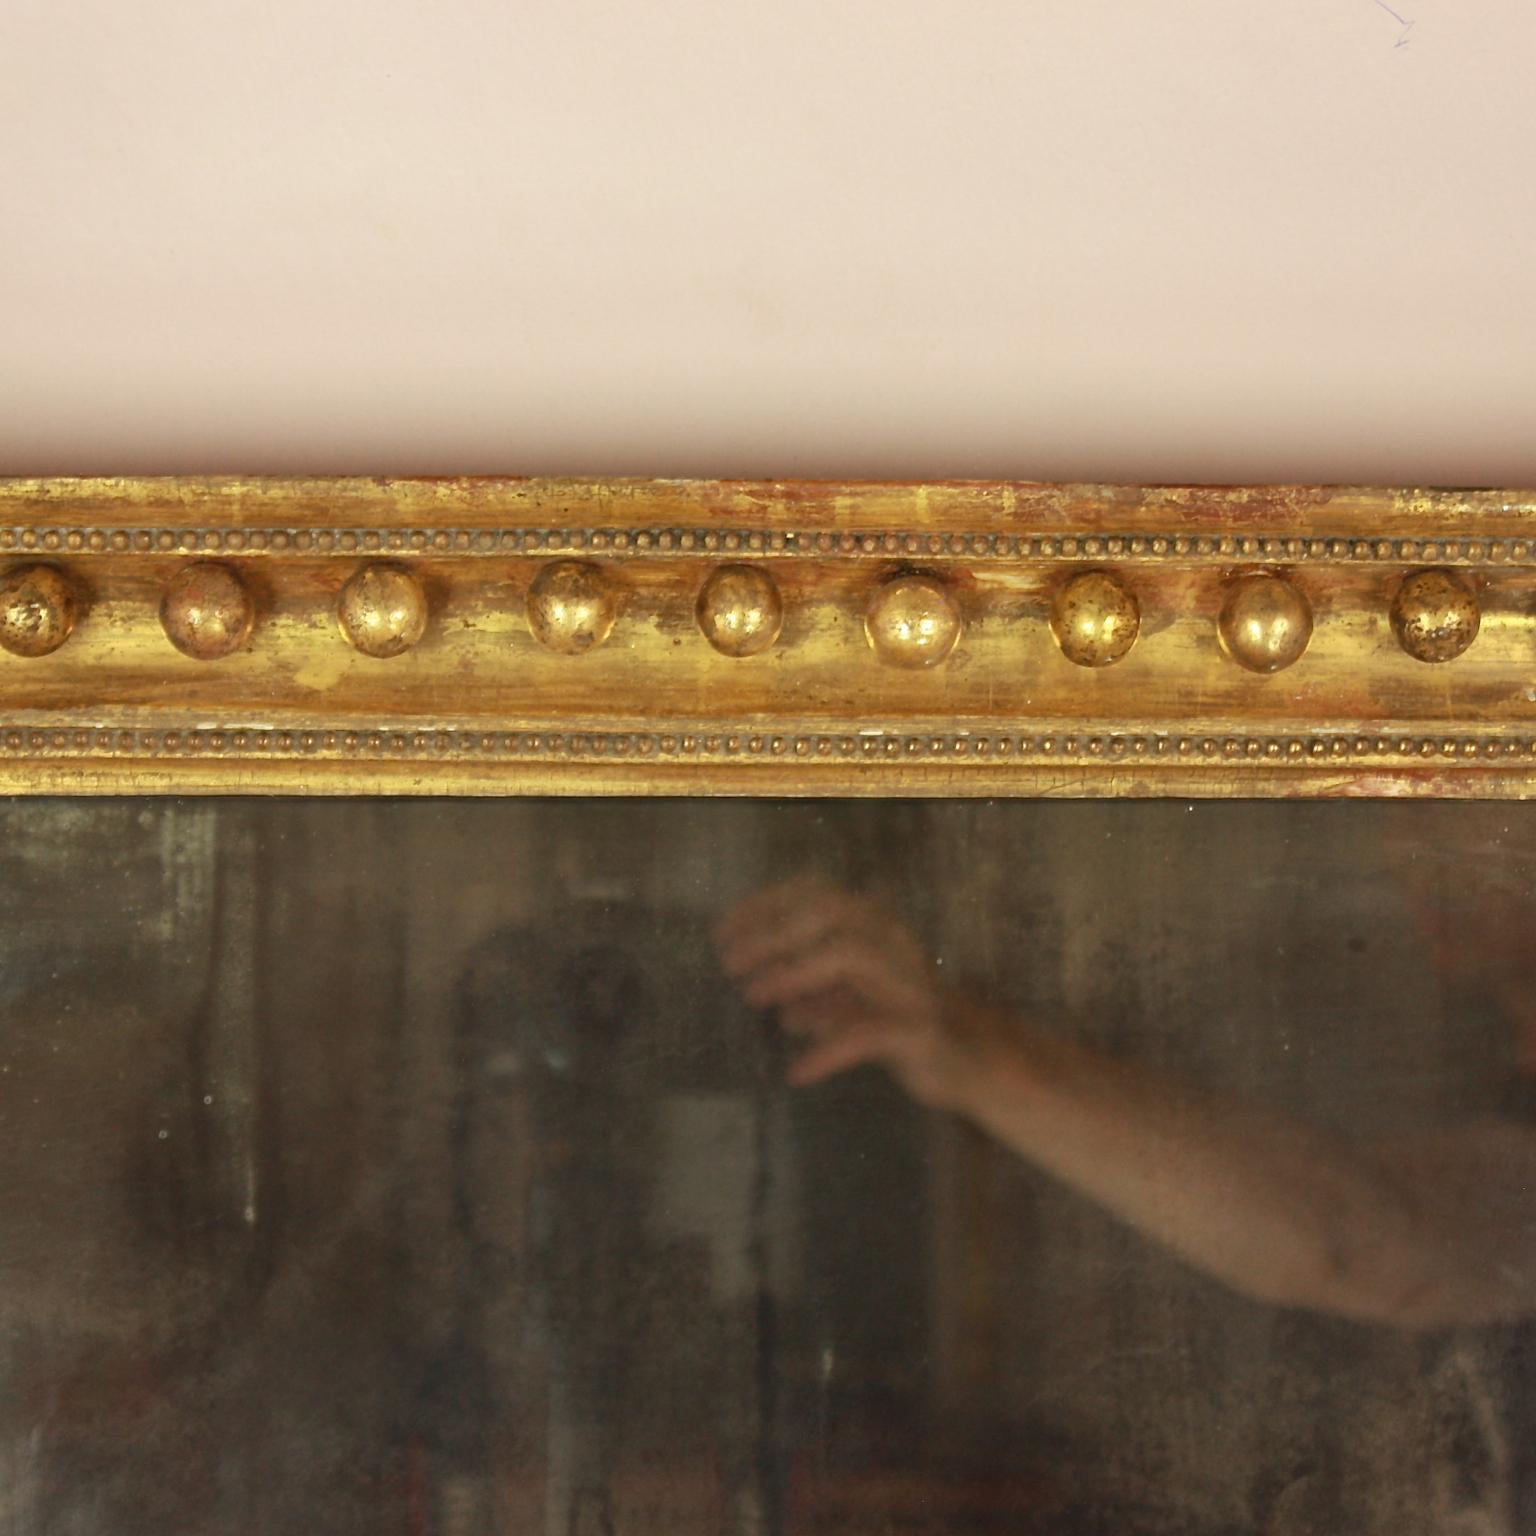 An early 19th century Regency giltwood mirror either of English or of American Federal origin. The original rectangular mirror plate set within a very fine water-gilded frame displaying an architectural cornice decorated with spherule-shaped